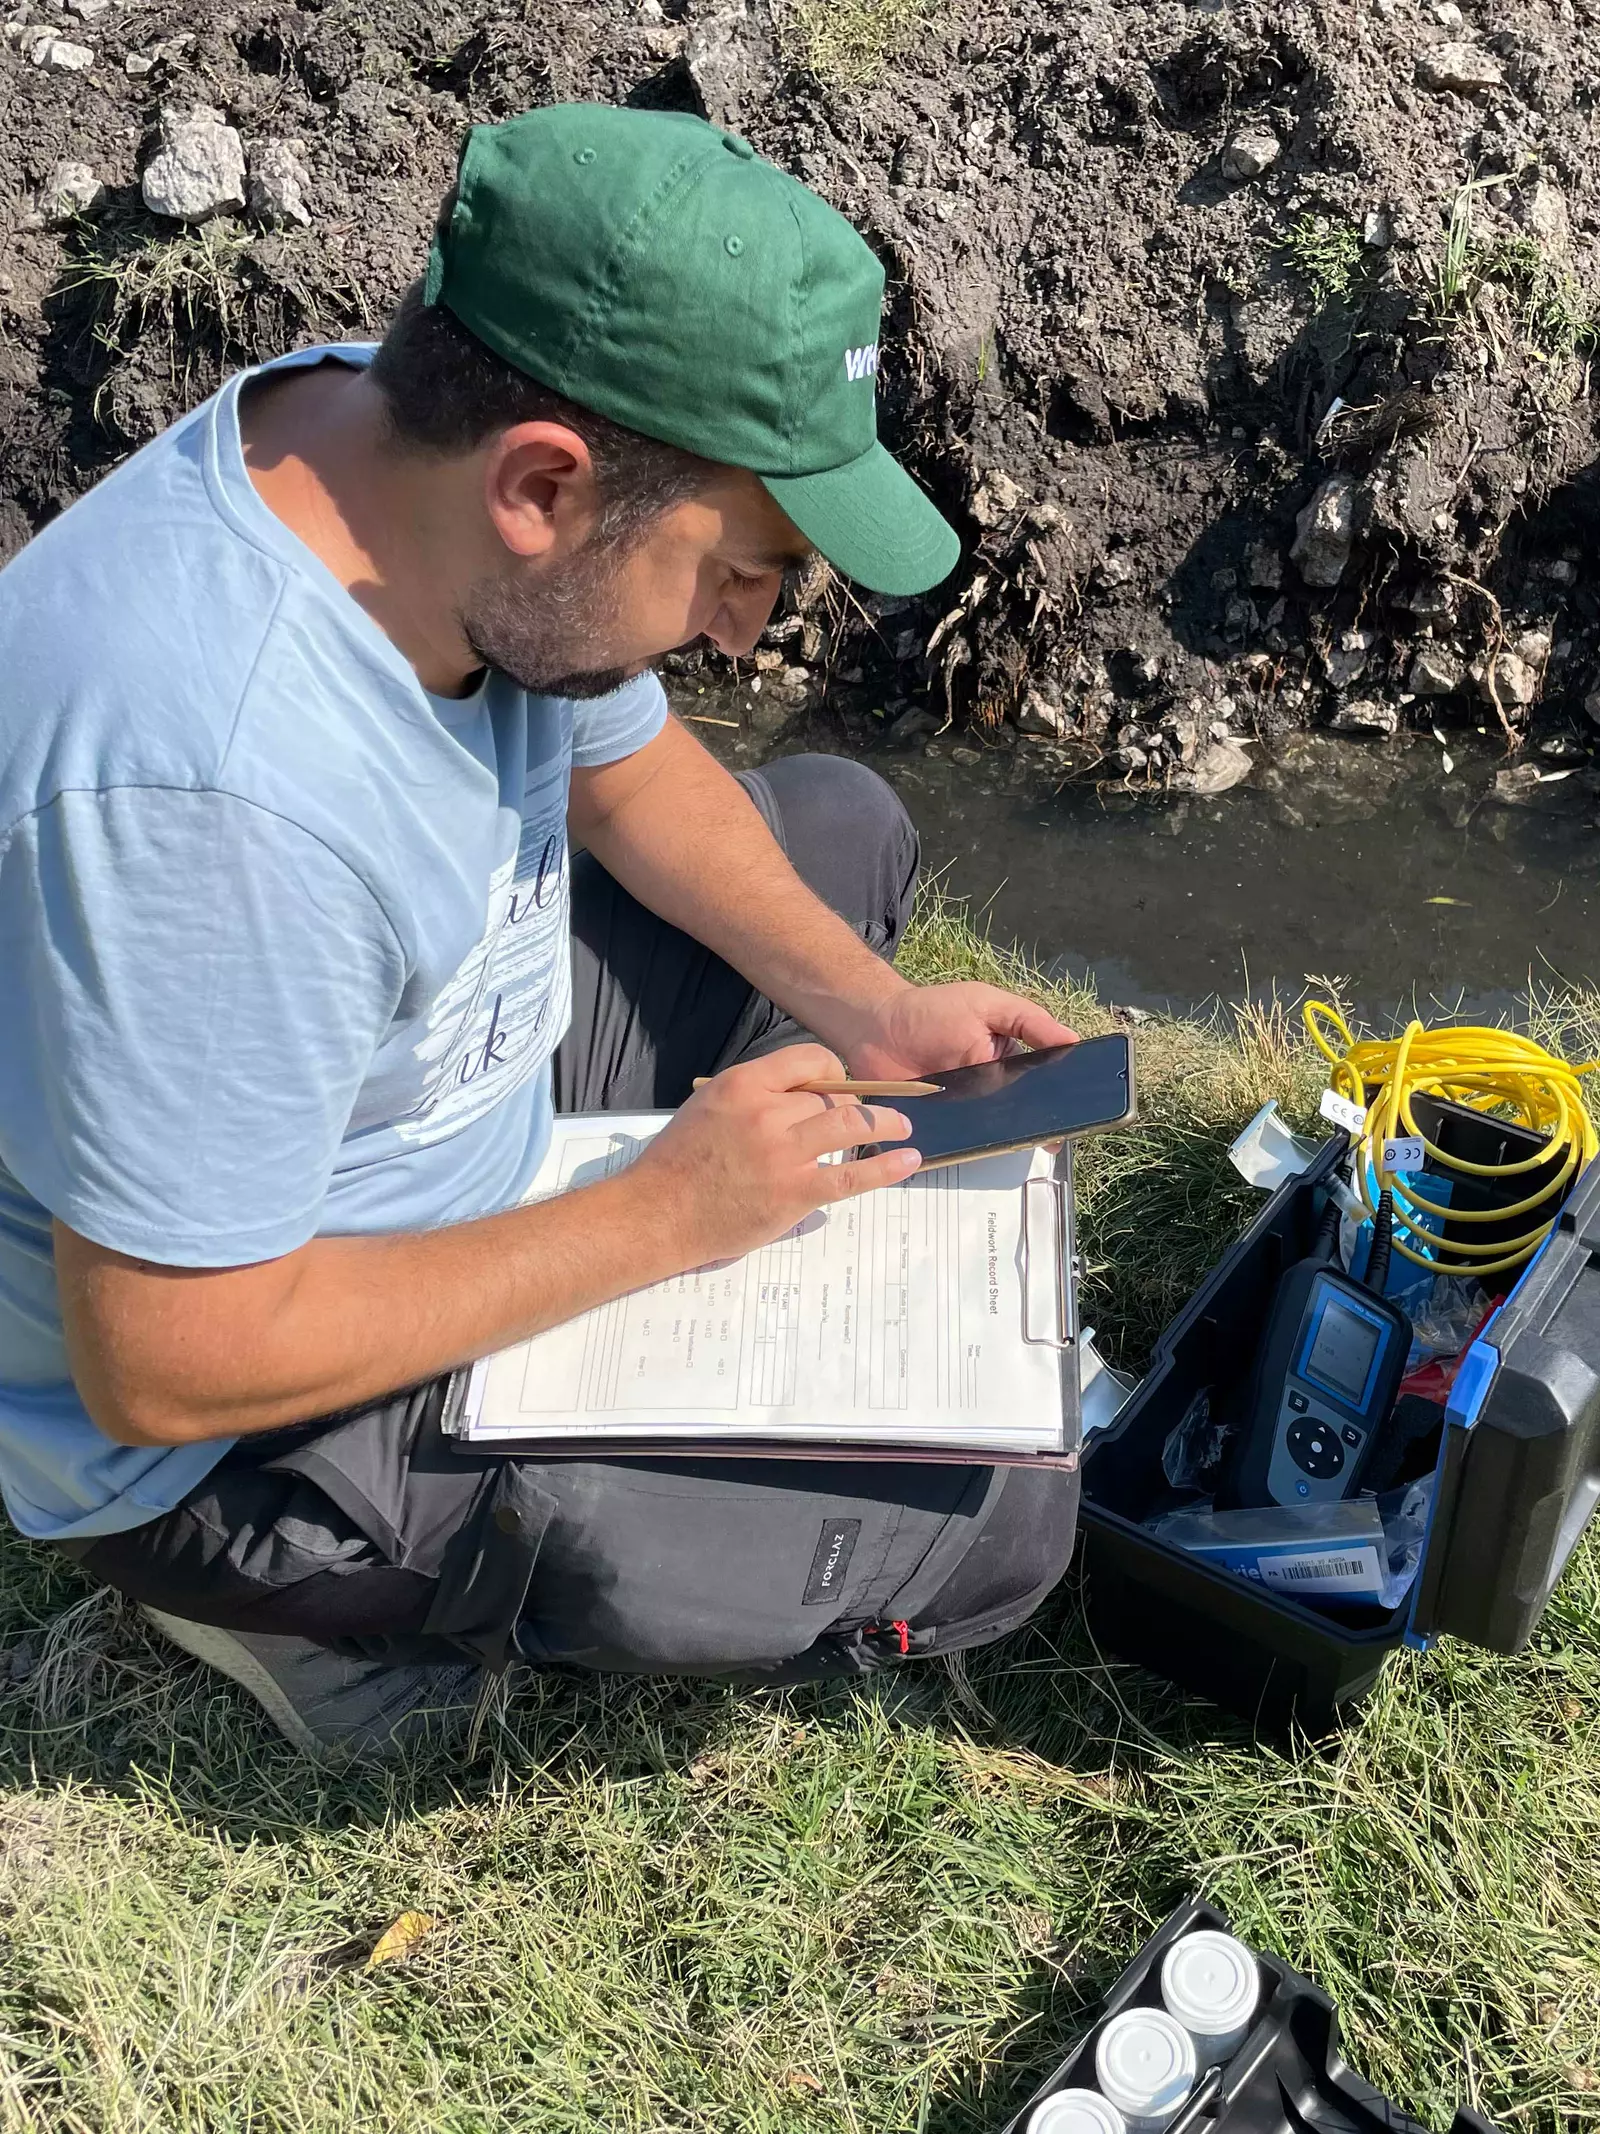 Taking GPS coordinates for a site of interest for conservation field work to save Lake Acıgöl killifish.